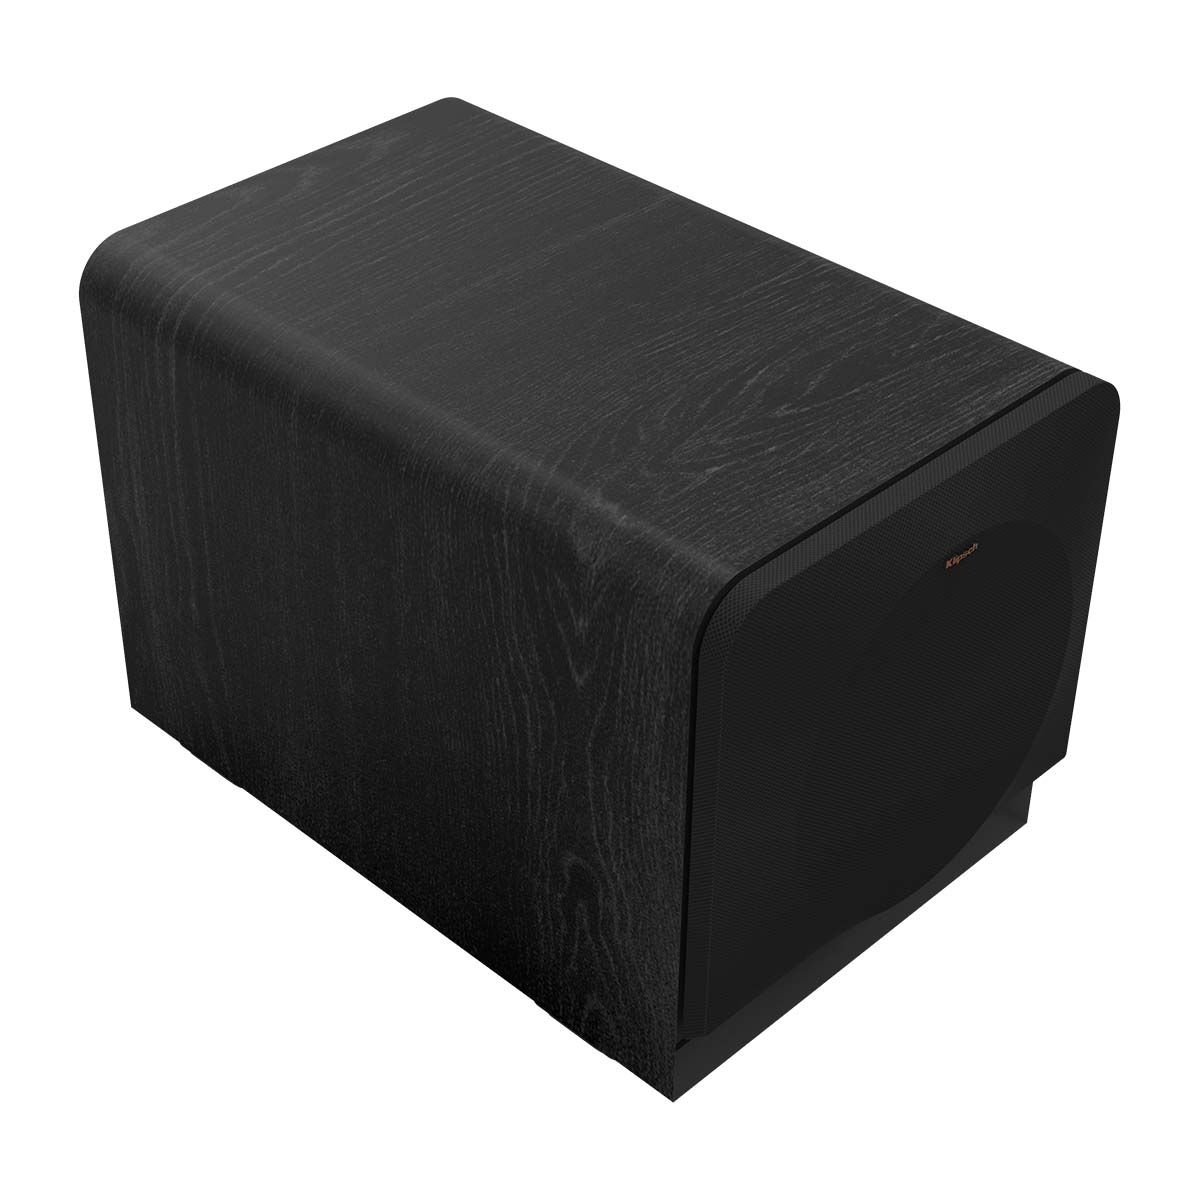 Klipsch RP-1000SW 10" Powered Subwoofer - Ebony - angled top left view with grille